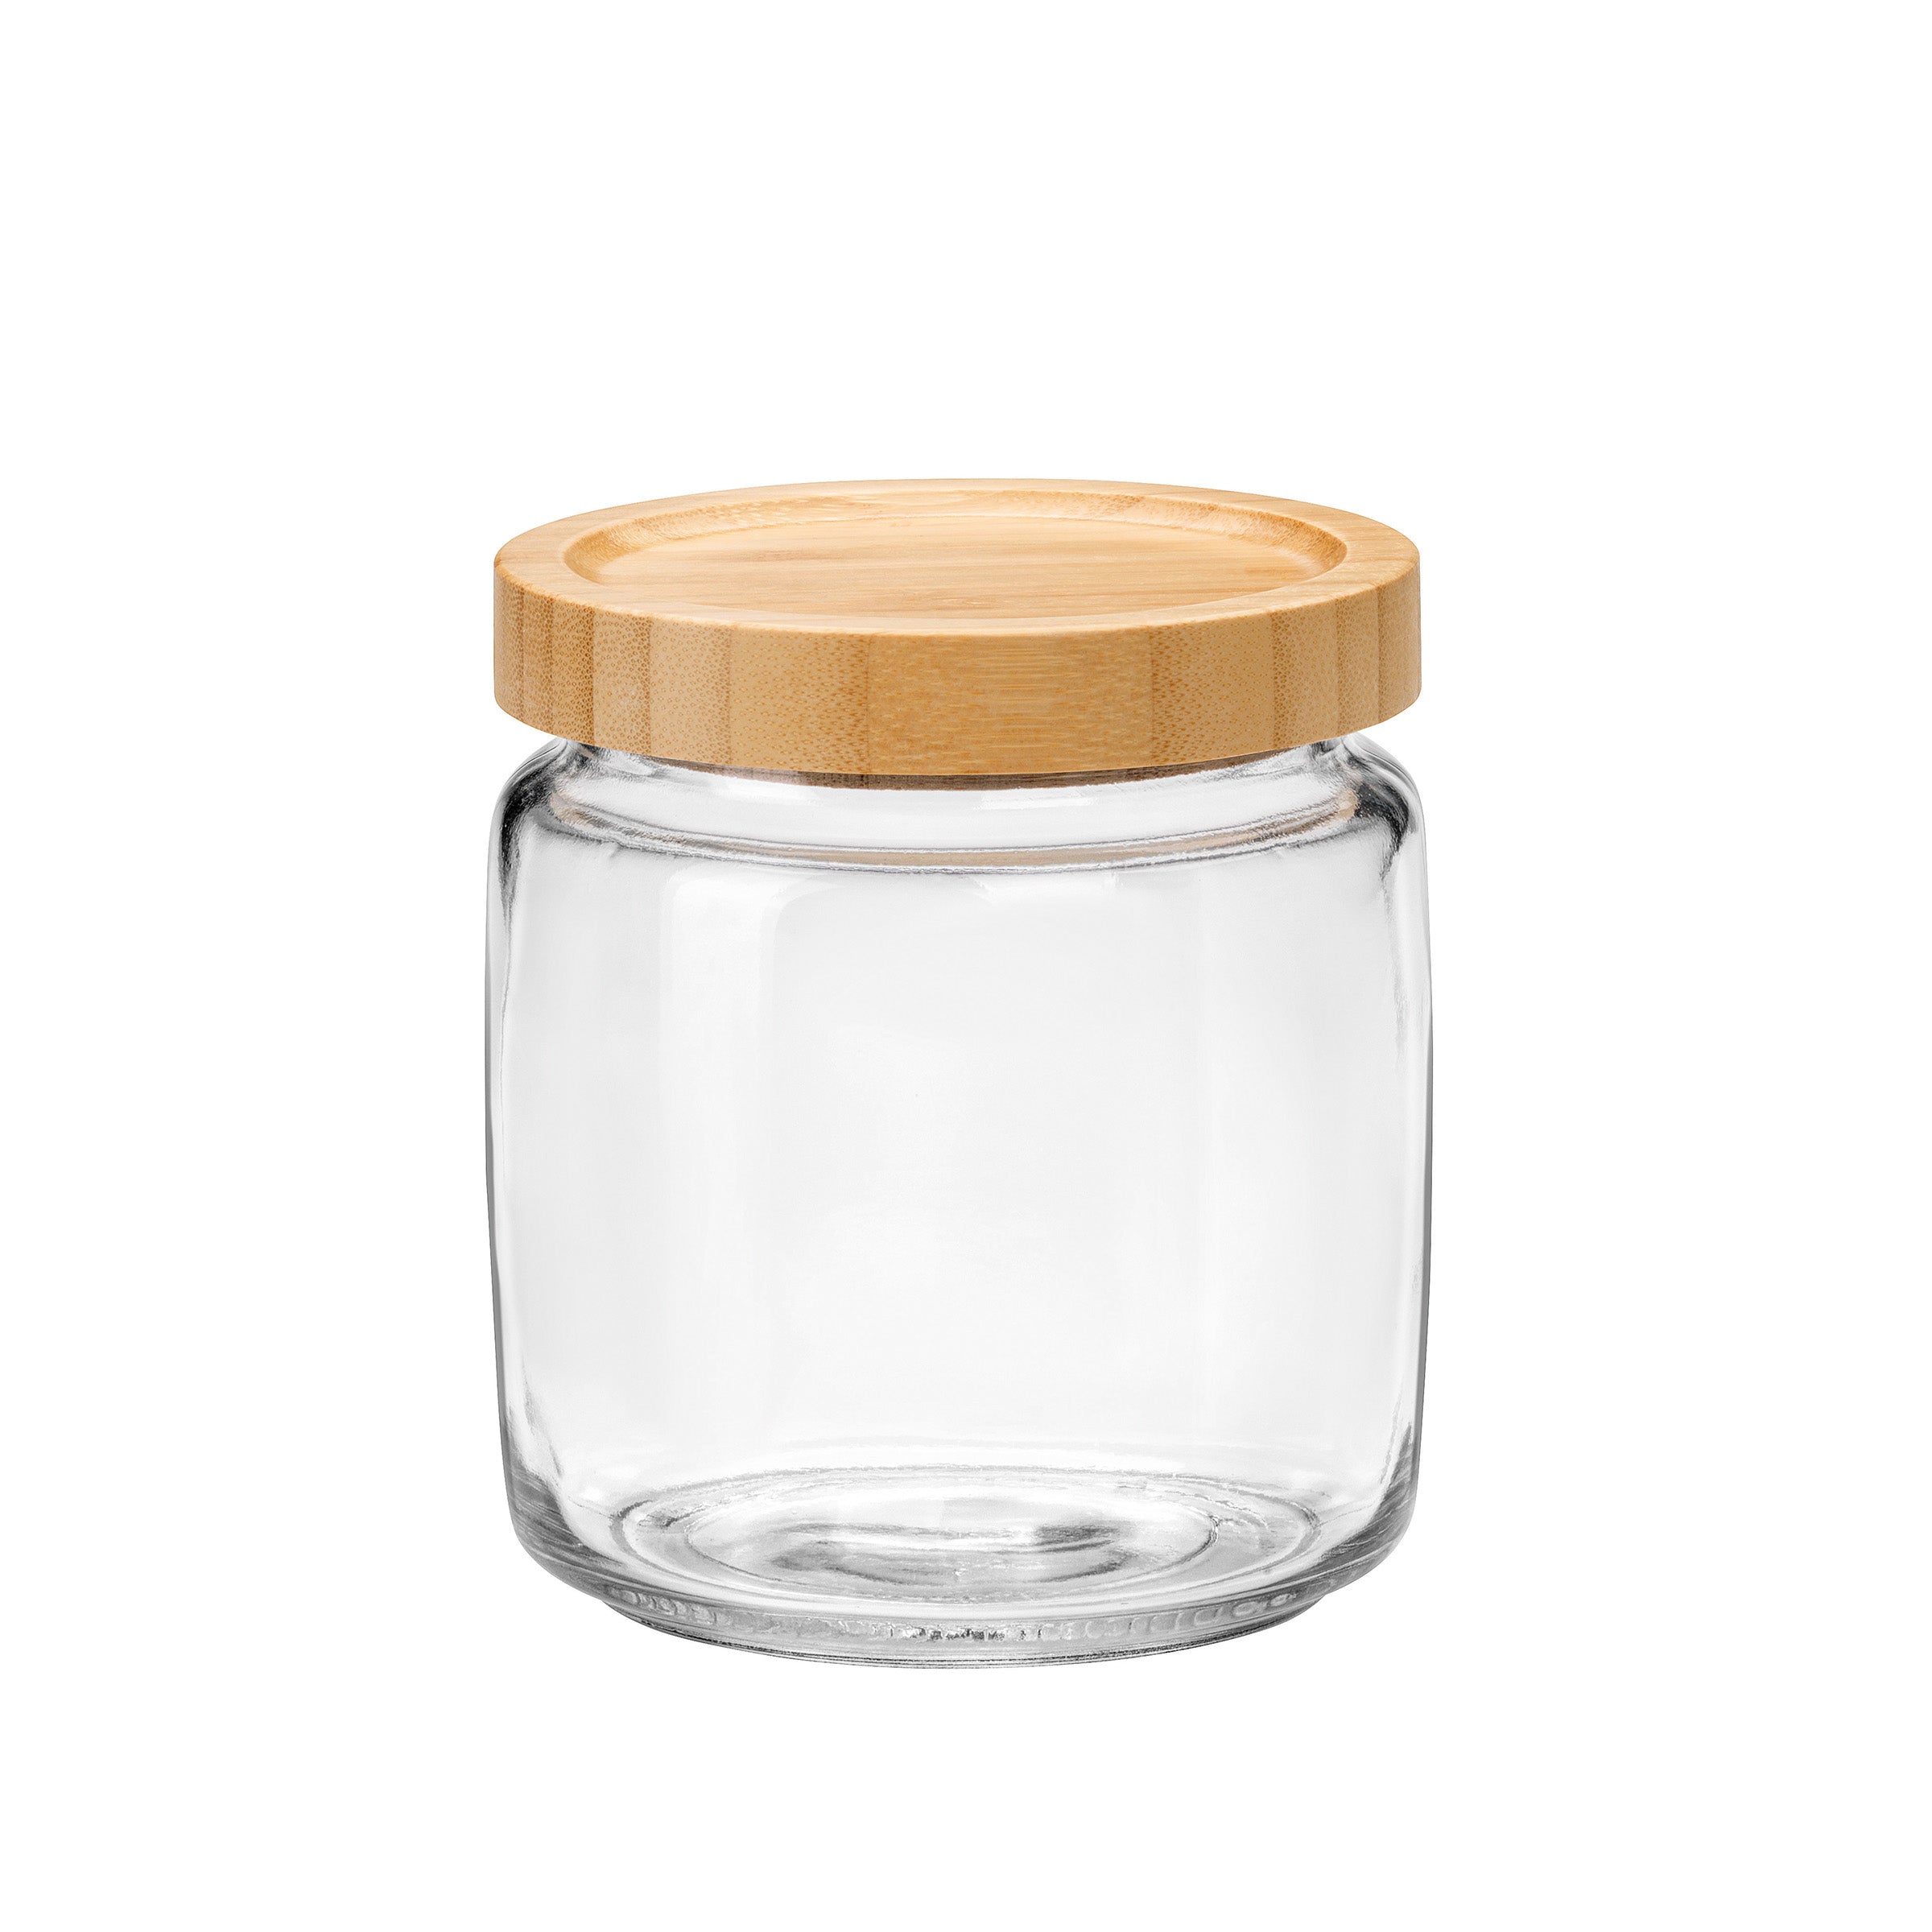 Round Spice Jars with Bamboo Lids, Set of 3 1 set